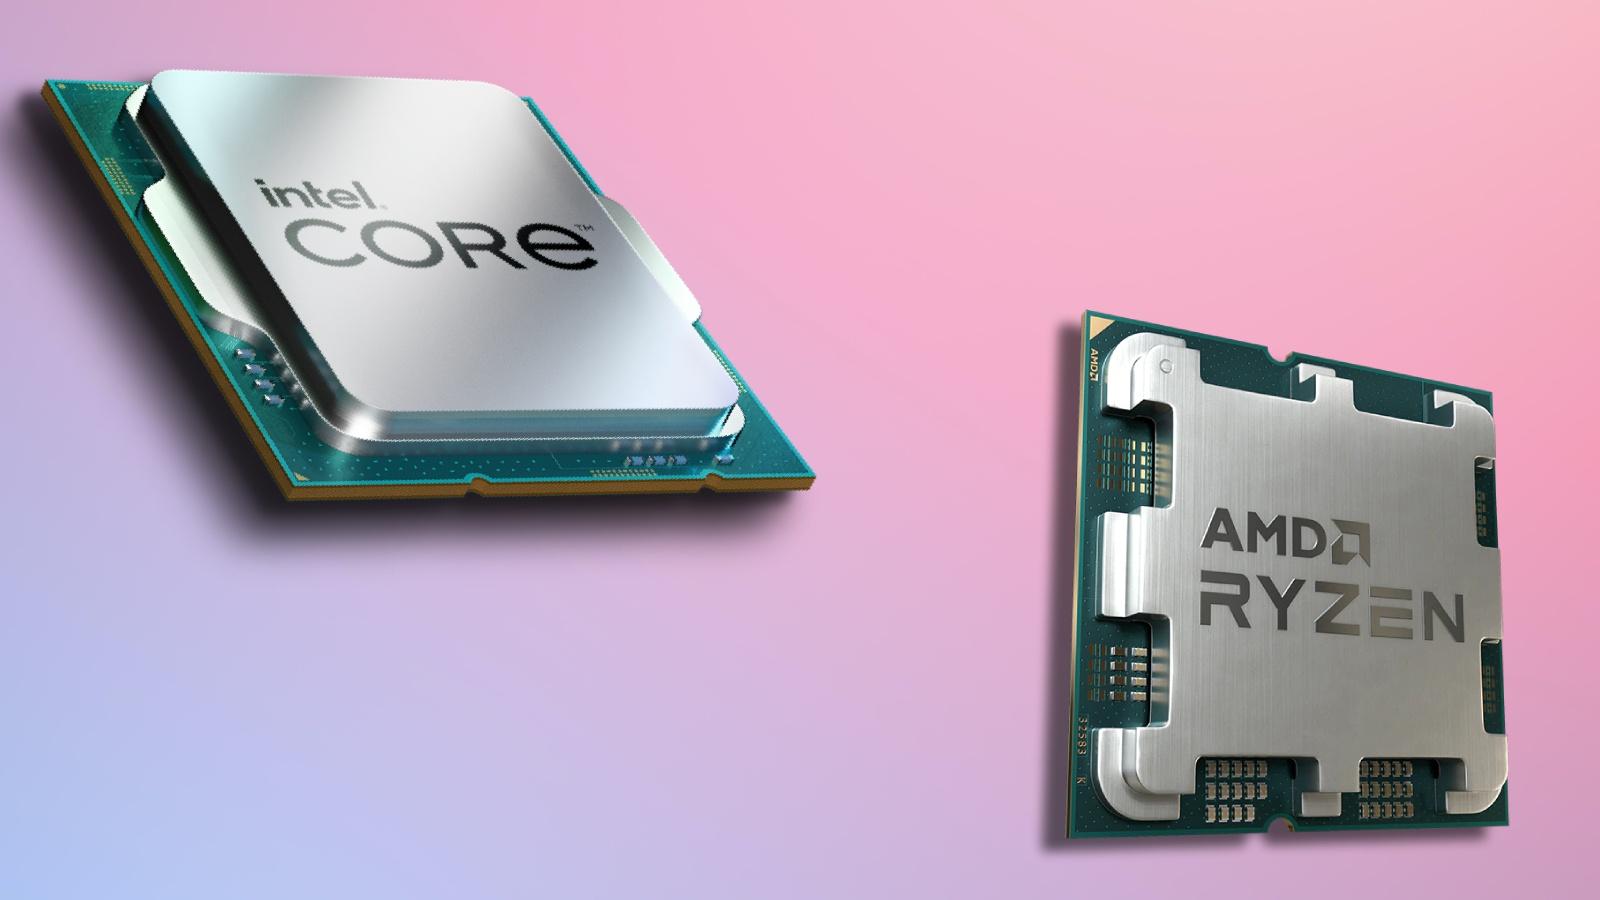 An Intel CPU and AMD CPU on a pink background.